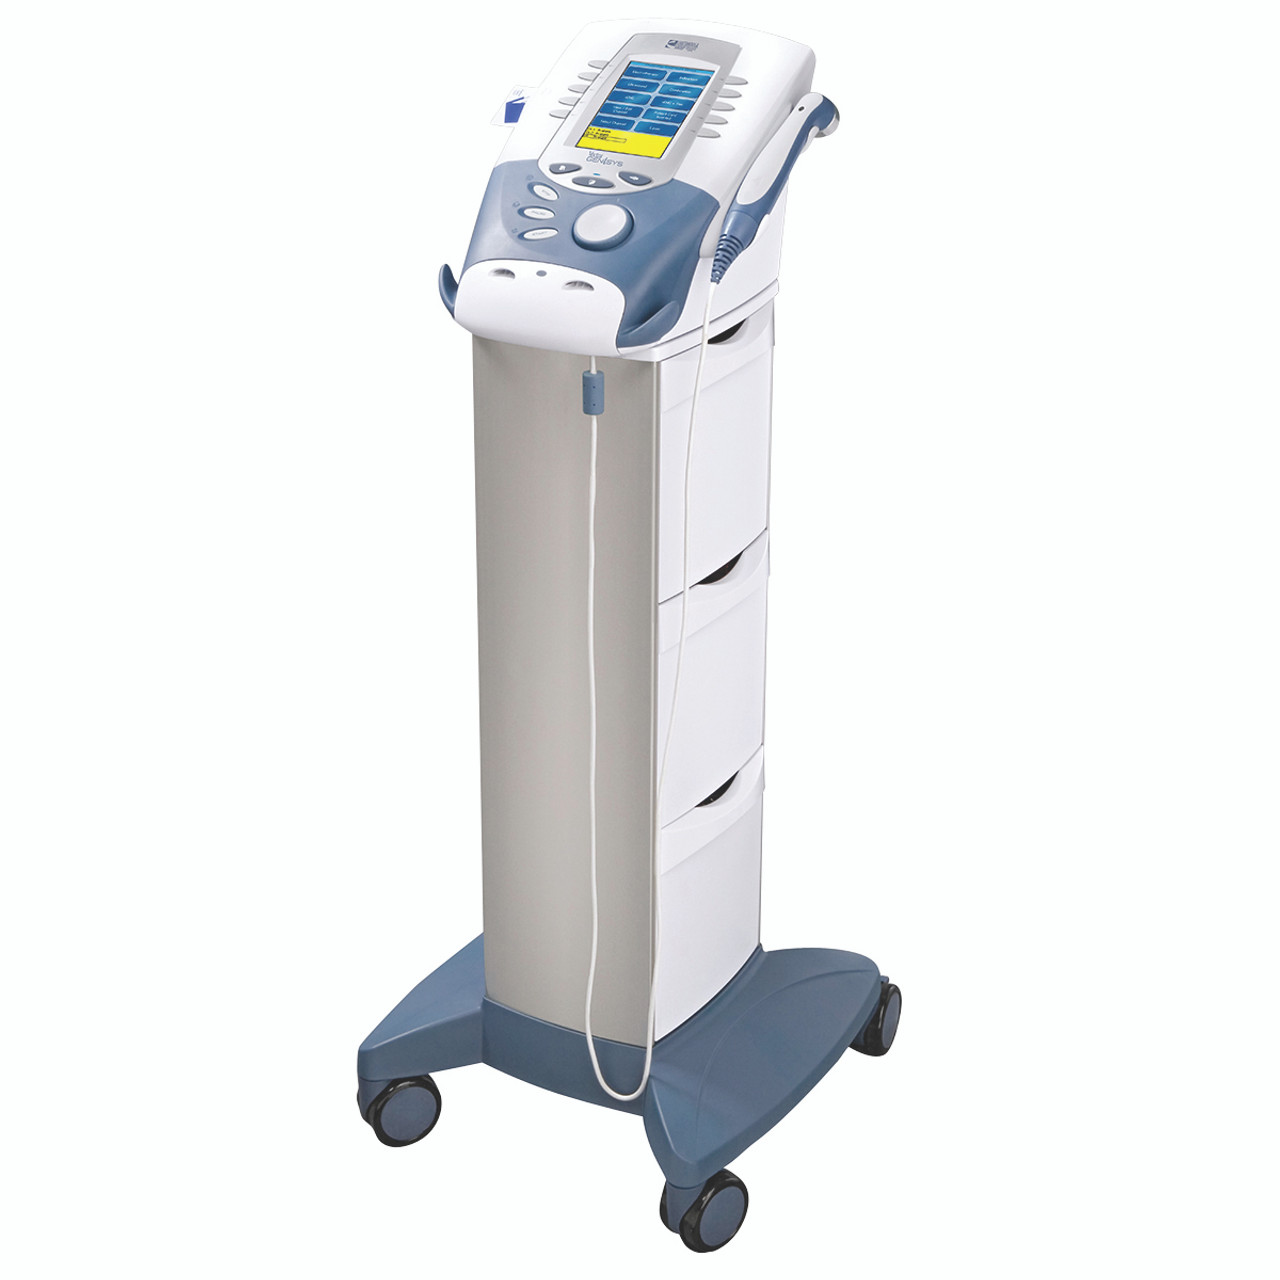 Vectra Genisys¨ 4 Channel Combination stim/ultrasound with EMG and cart